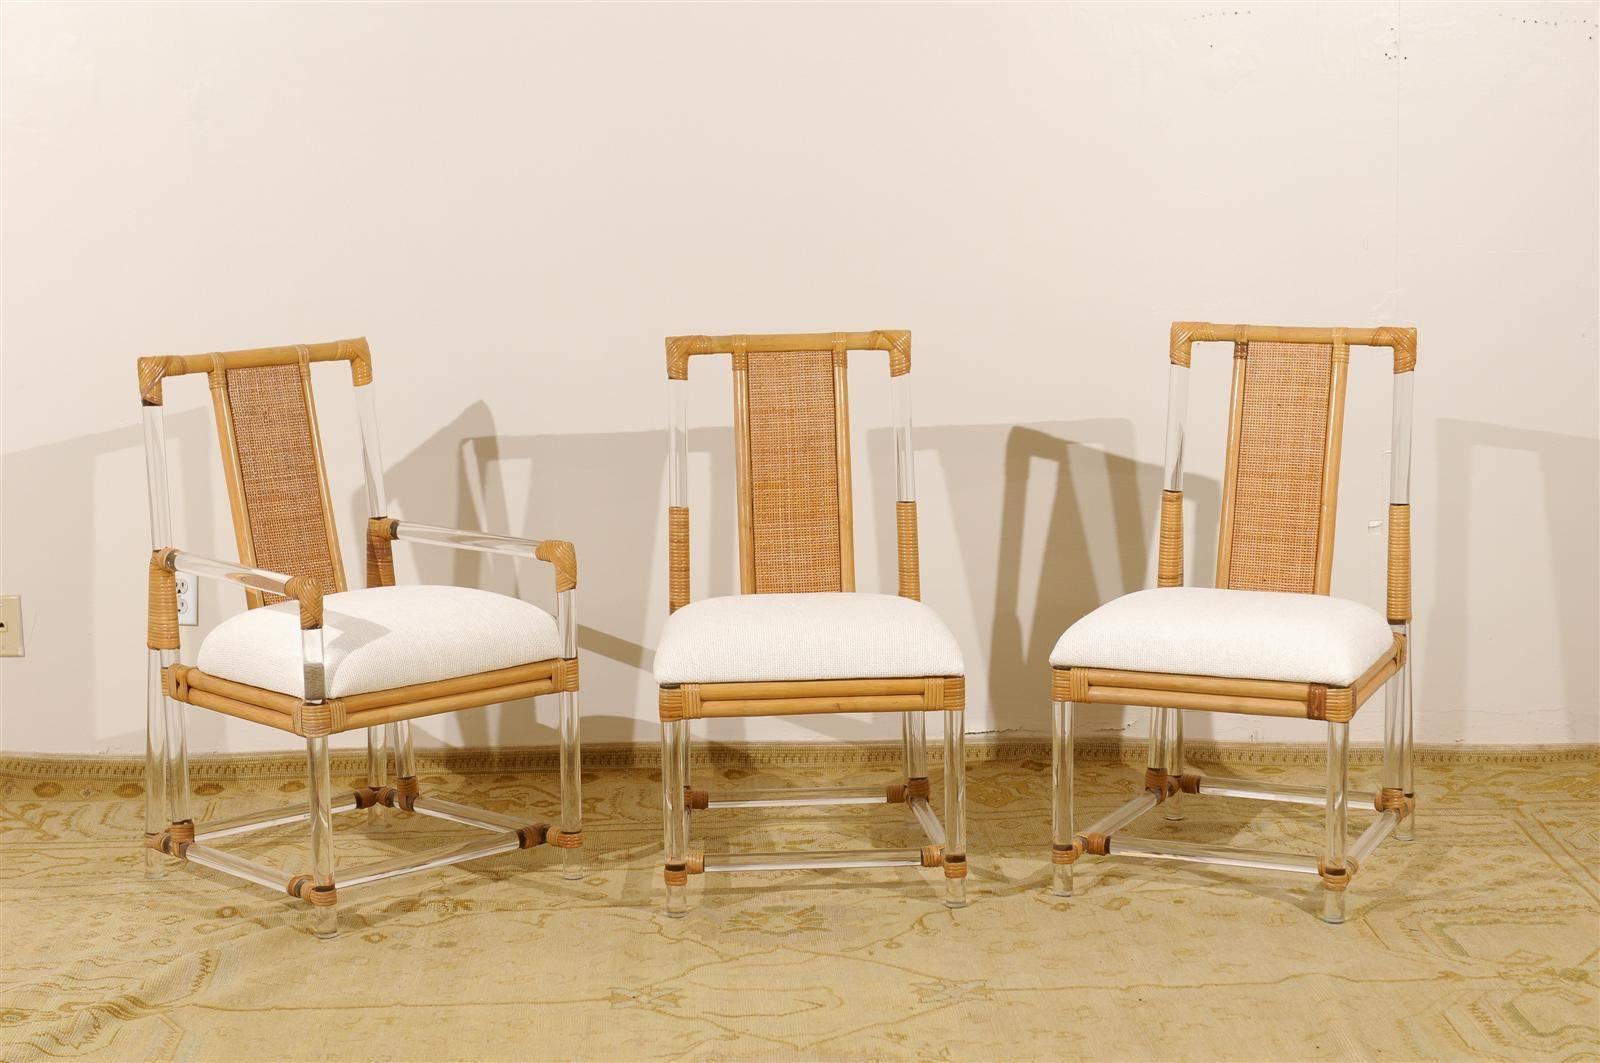 An absolutely Jaw-Dropping meticulously restored set of eight (8) iconic dining chairs, circa 1975. Lucite rod and hardwood construction with beautiful cane and rattan accents. Stout, comfortable and expertly crafted. Serious chairs specifically